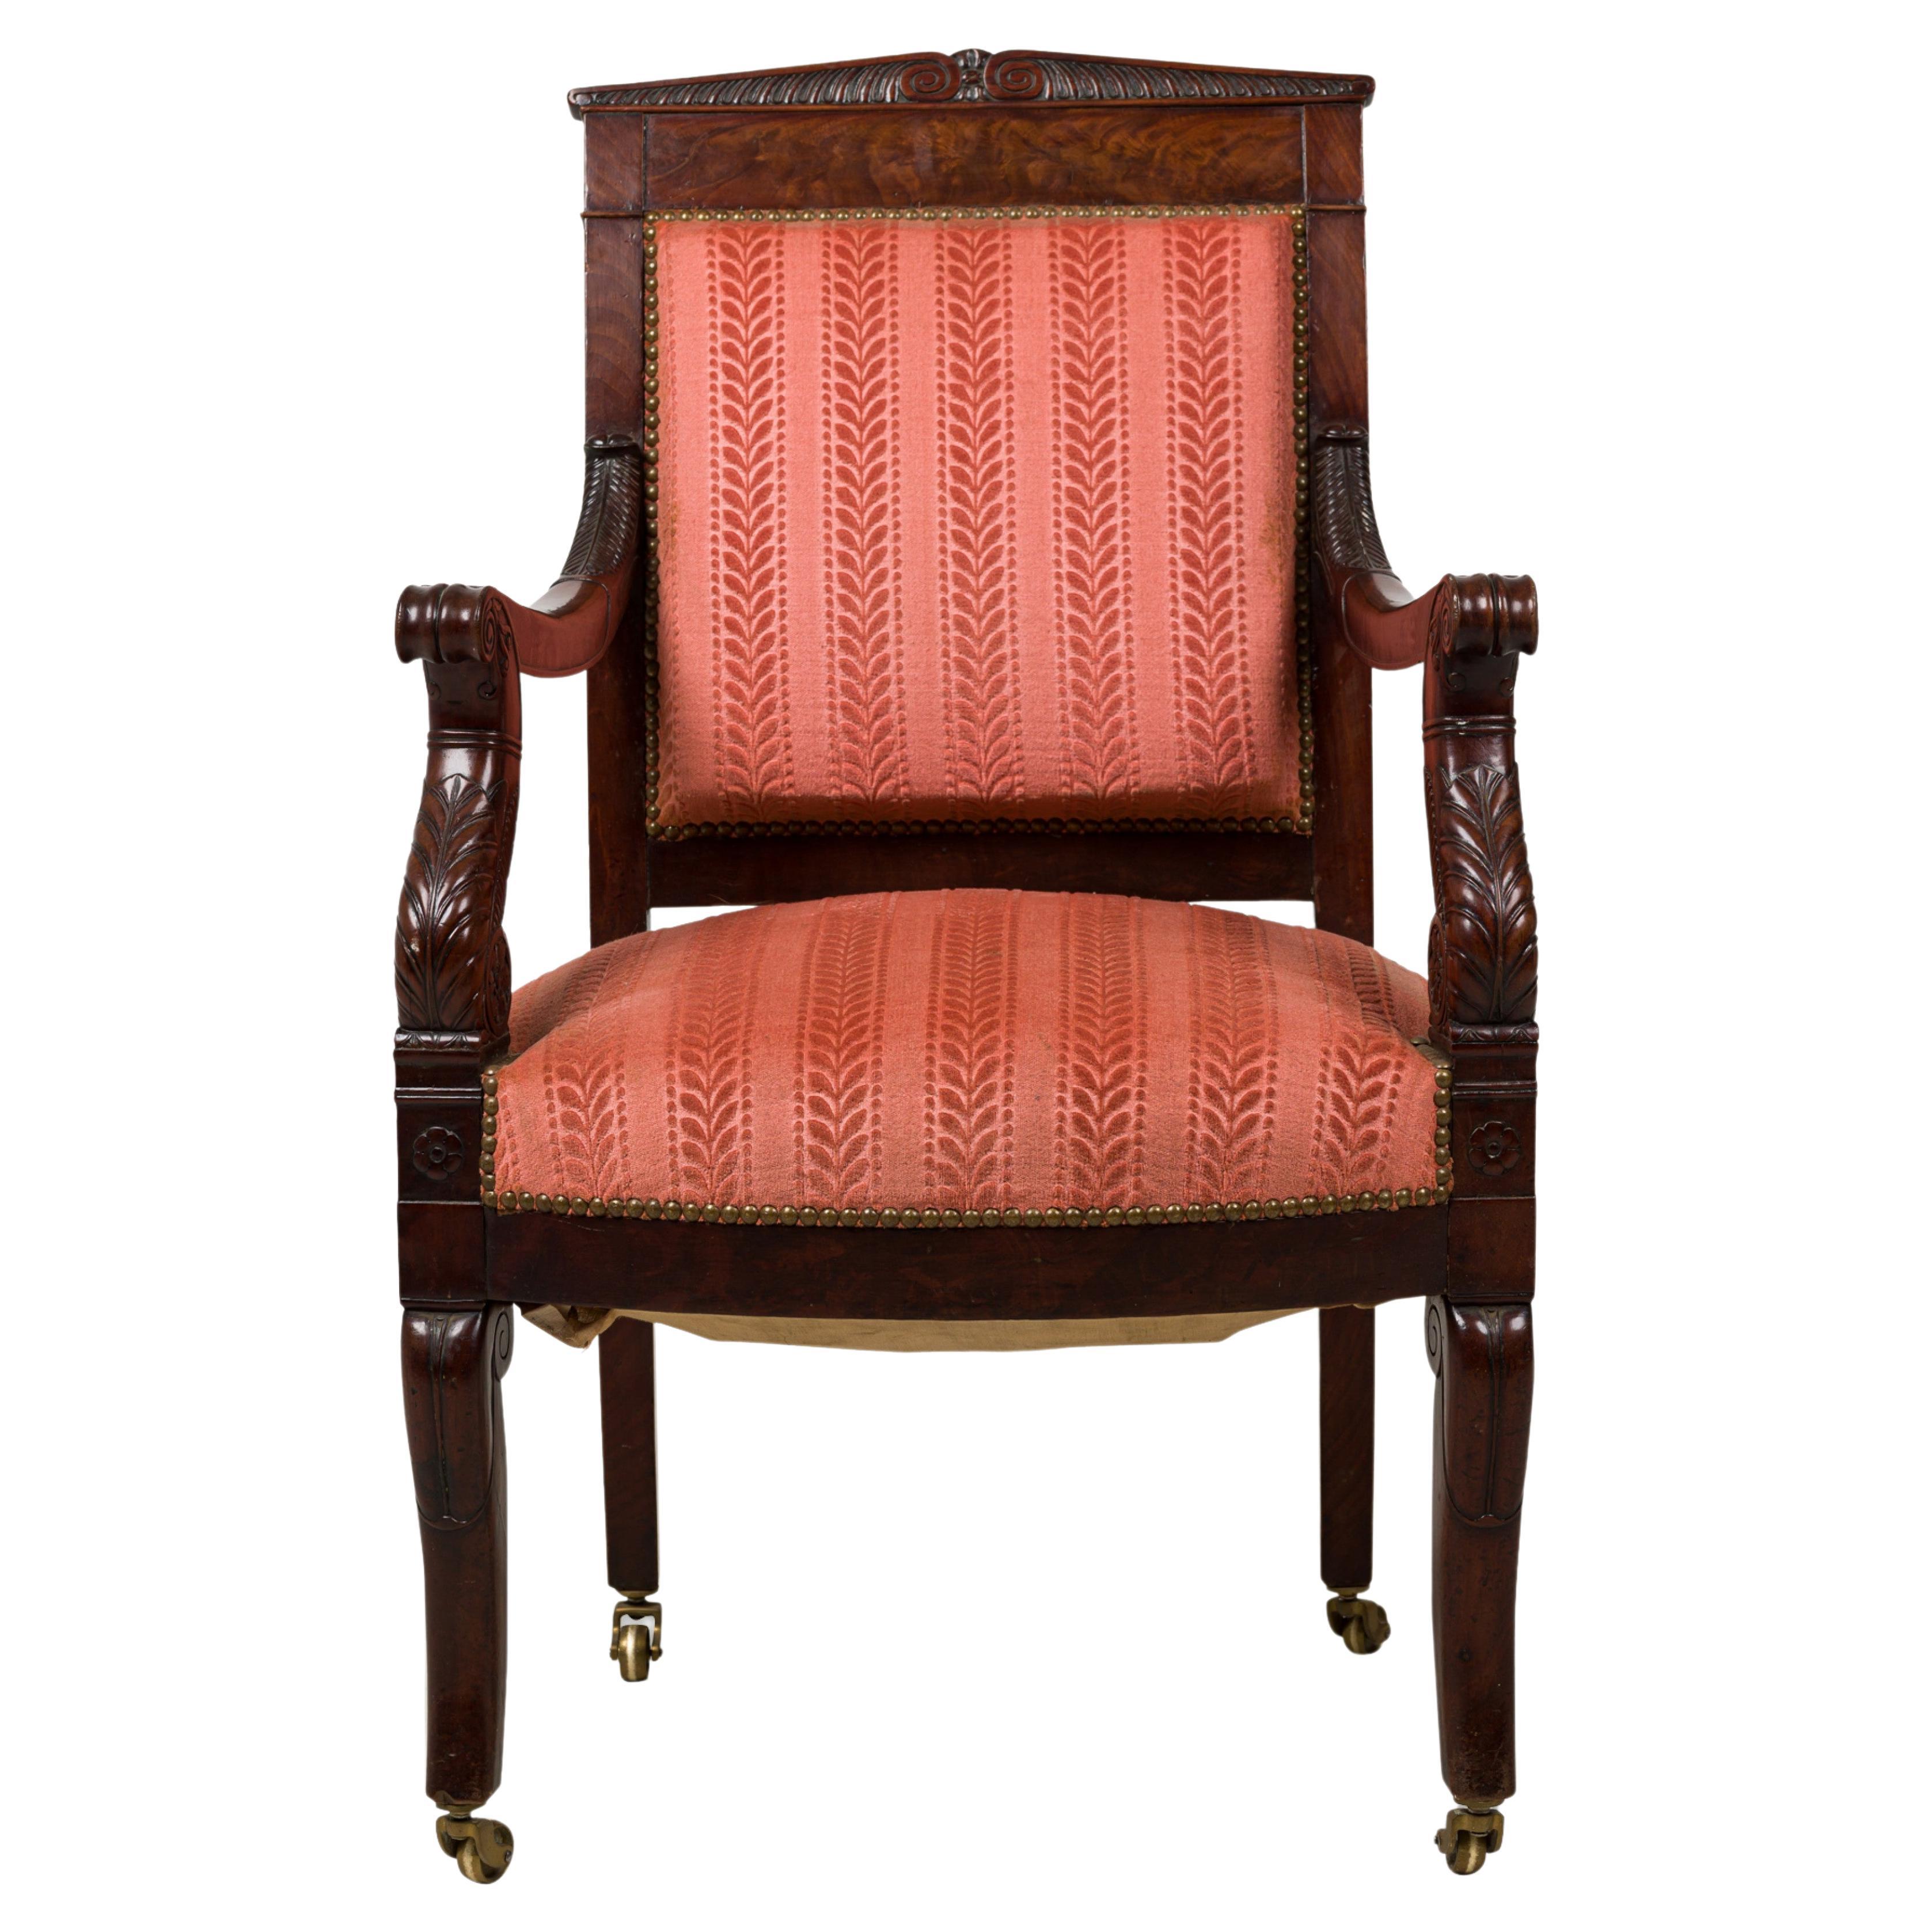 French Empire Armchair with Red Floral Striped Damask Upholstery